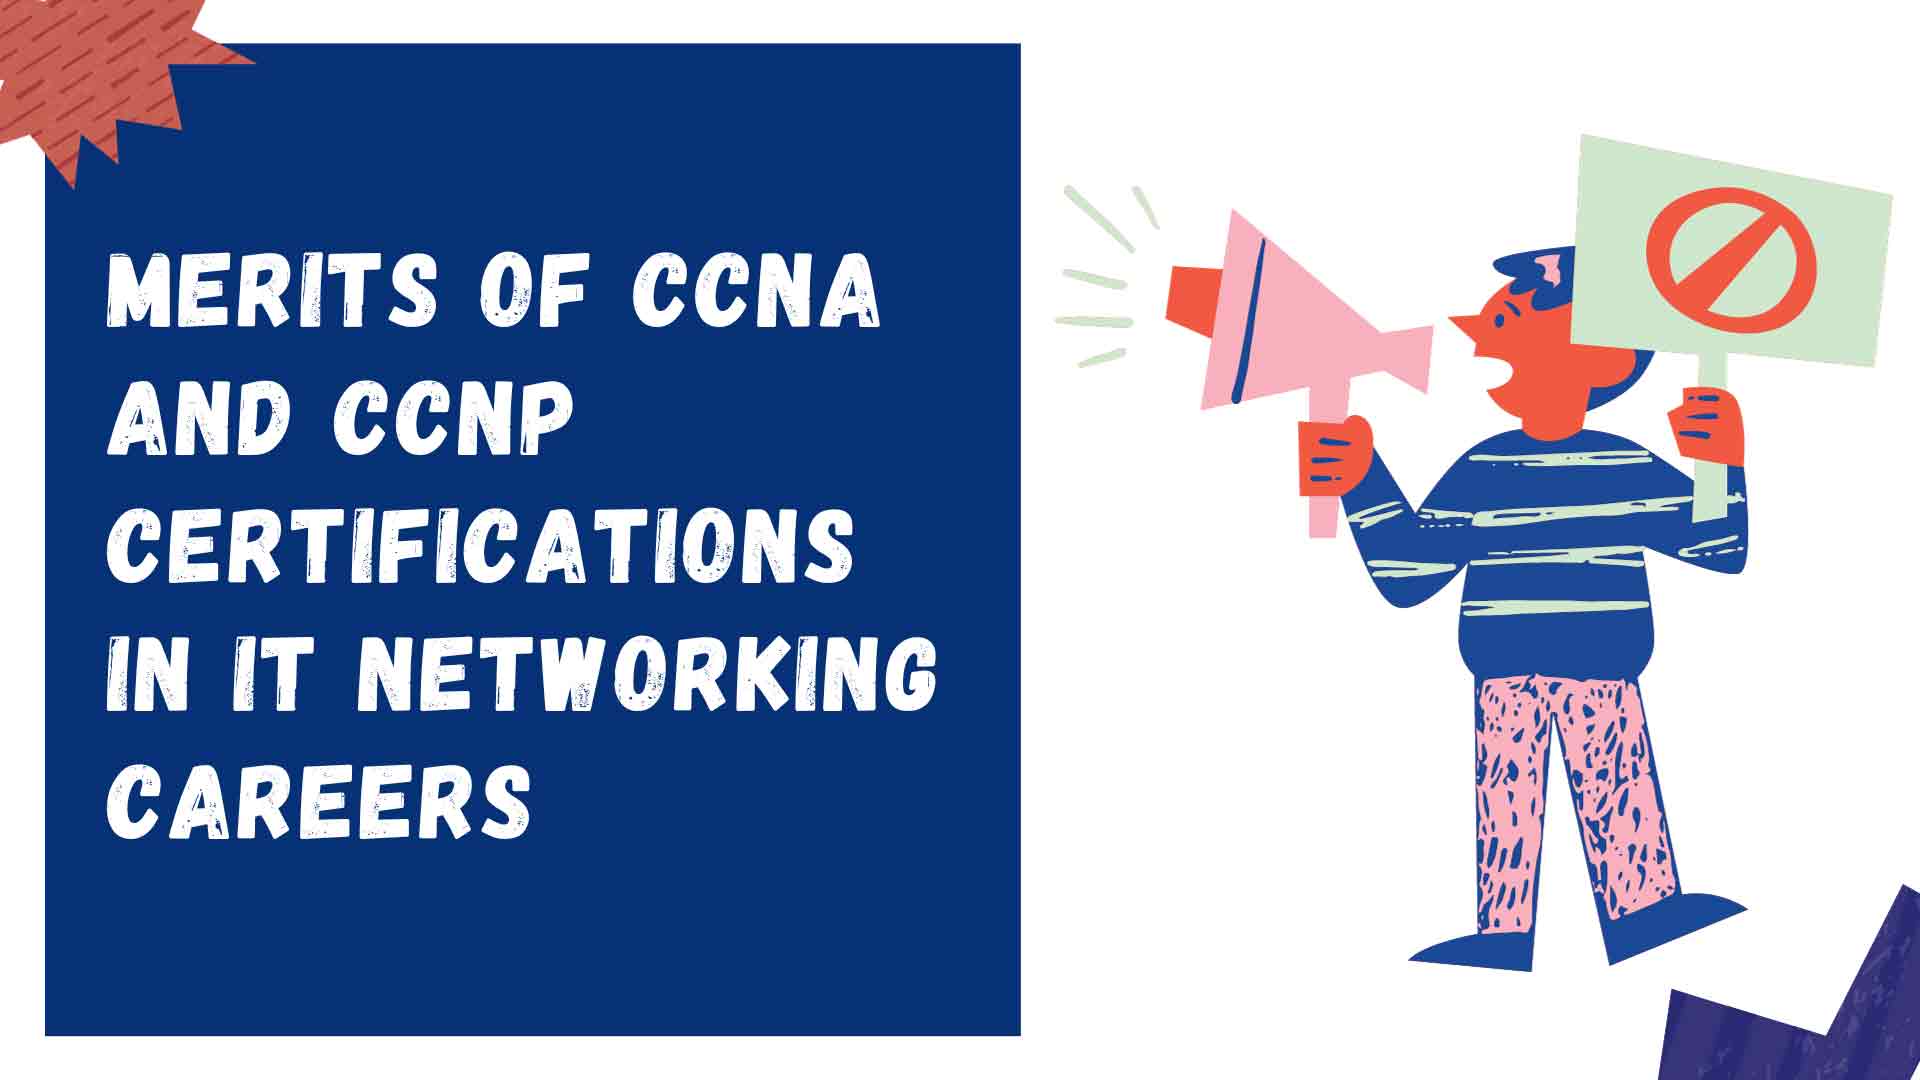 Merits of CCNA and CCNP Certifications in IT Networking Careers